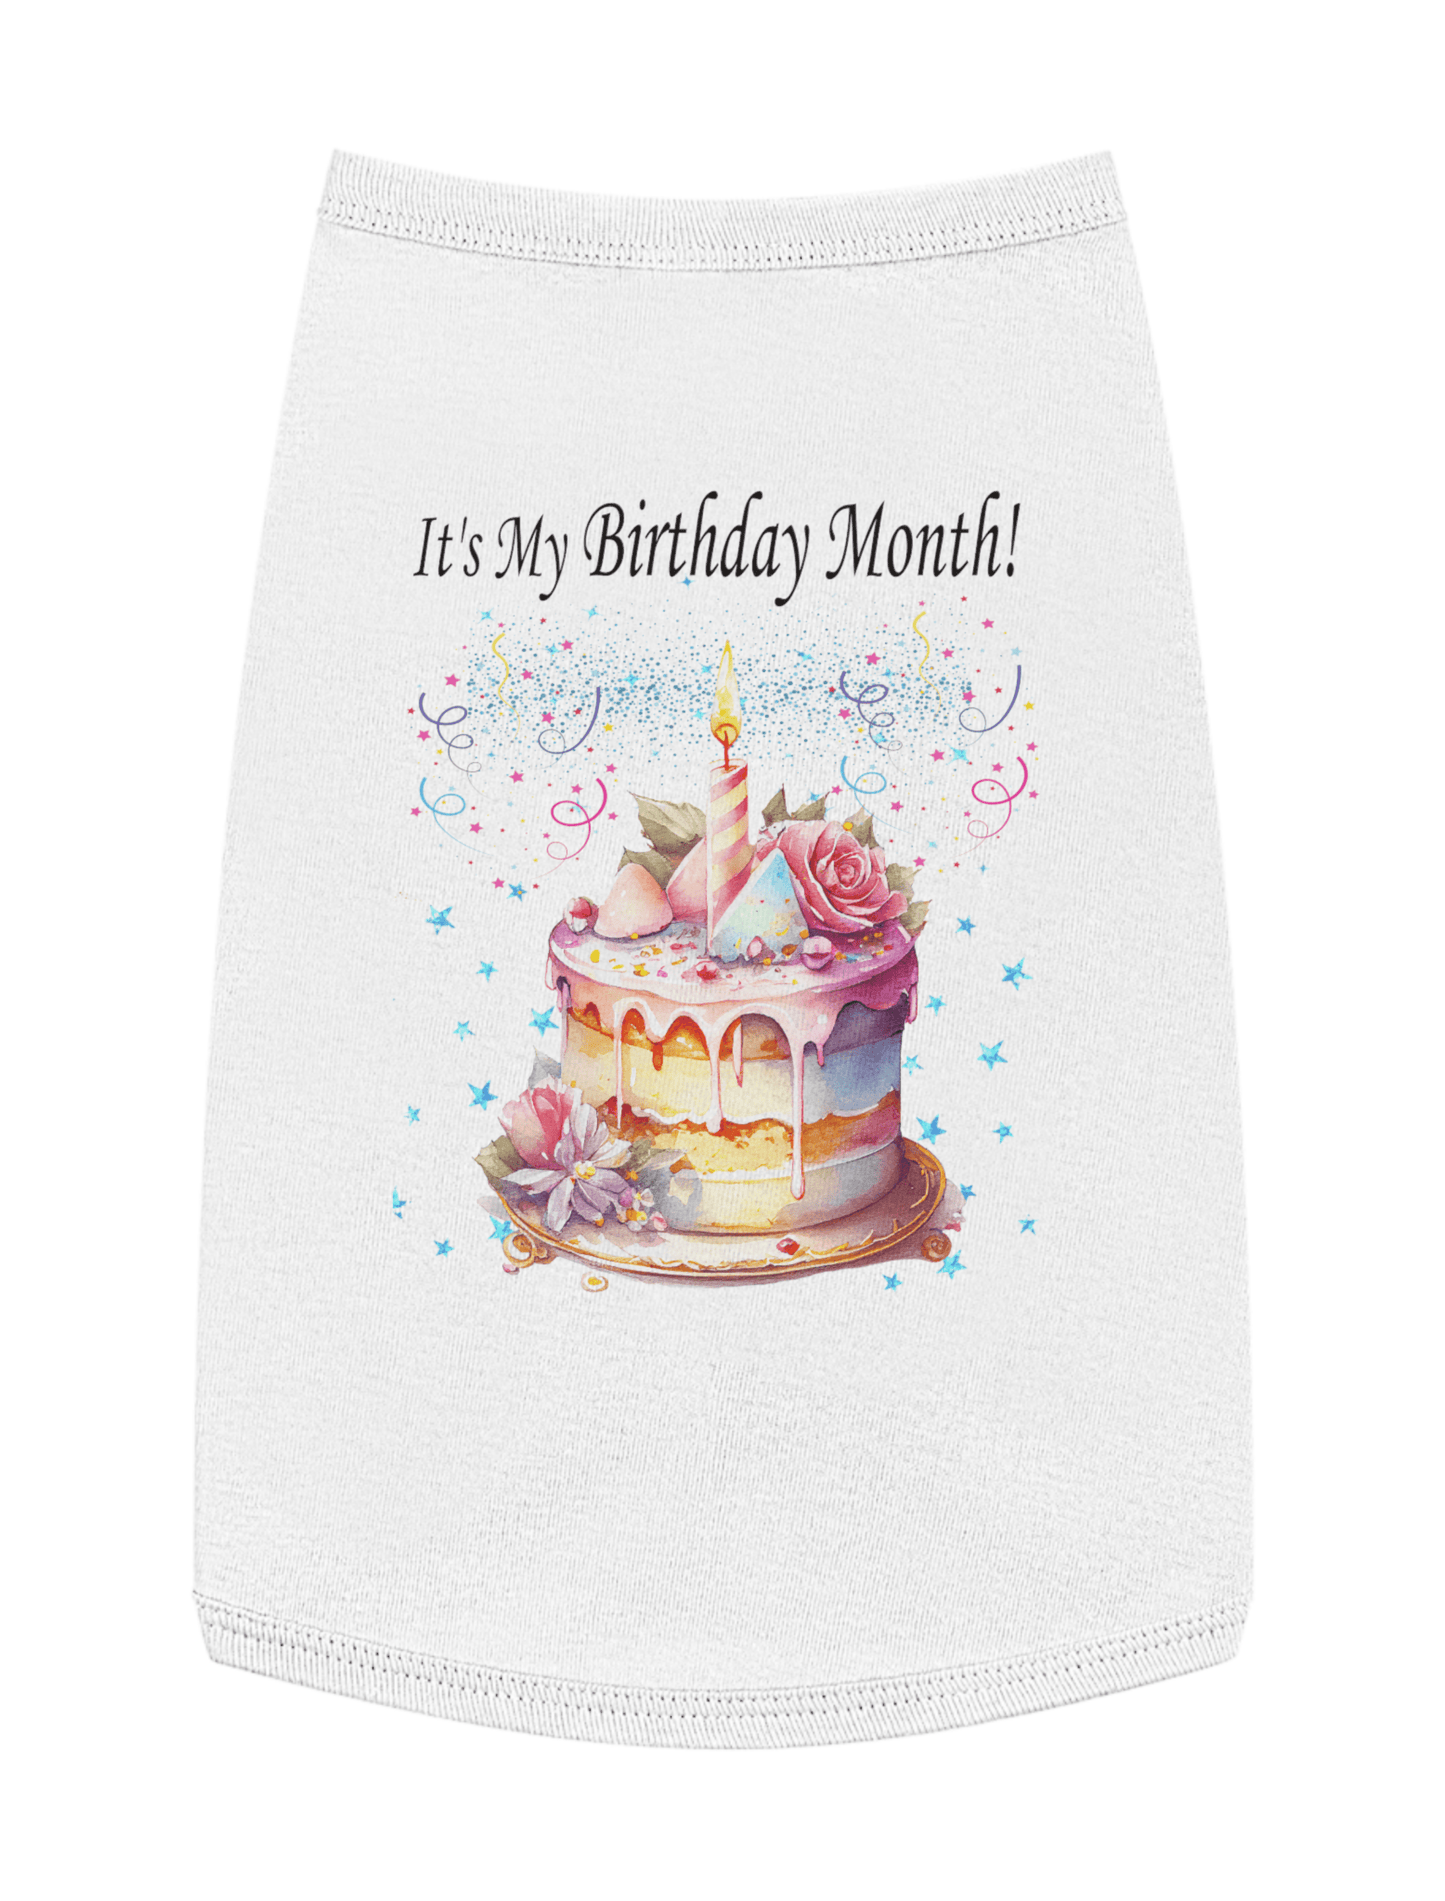 Personalized Dog Birthday Shirt, Cute Dog Tanks, Shirts for cats, Dog Clothes,  Cute and Funny Pet Apparel for Small to Large Dogs